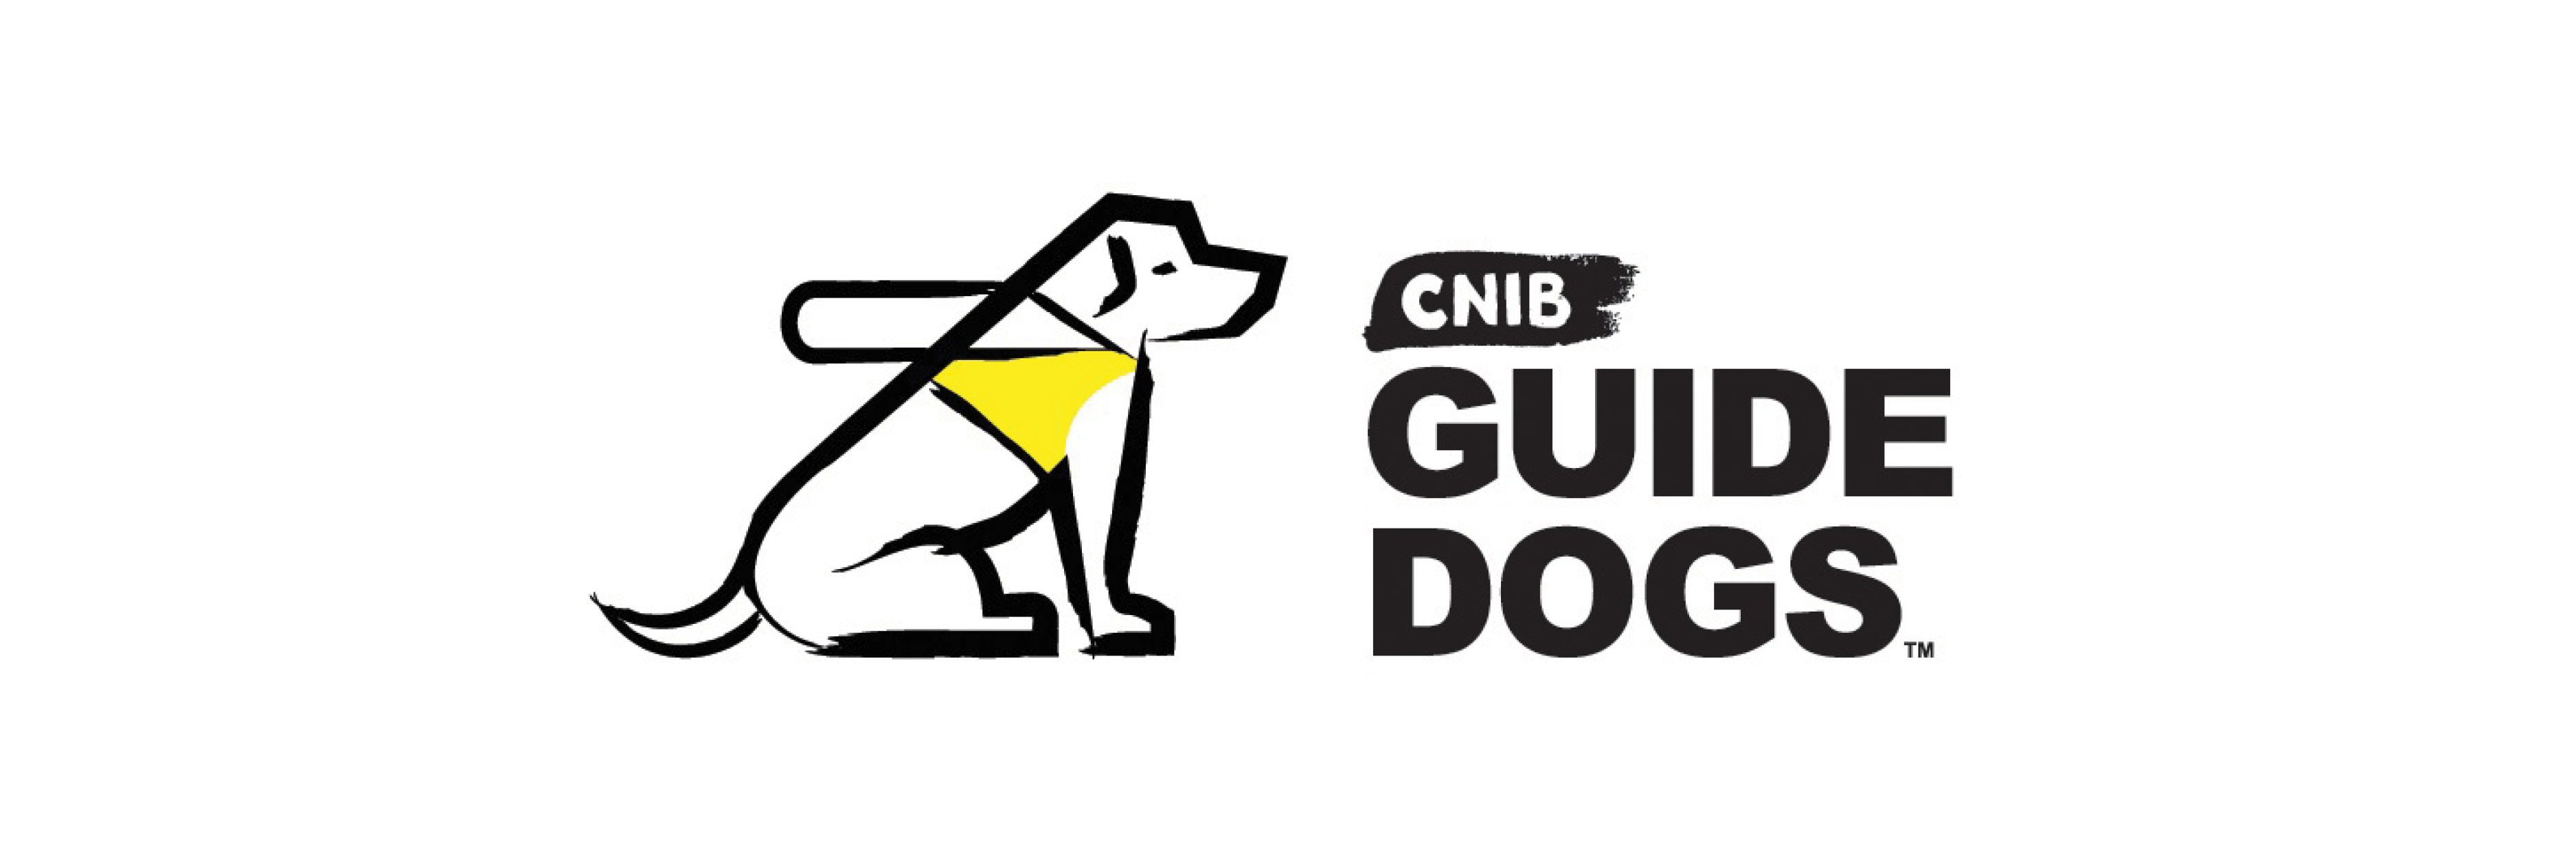 CNIB Guide Dogs Logo: A sketch of a dog in harness sitting next to the words "CNIB Guide Dogs".